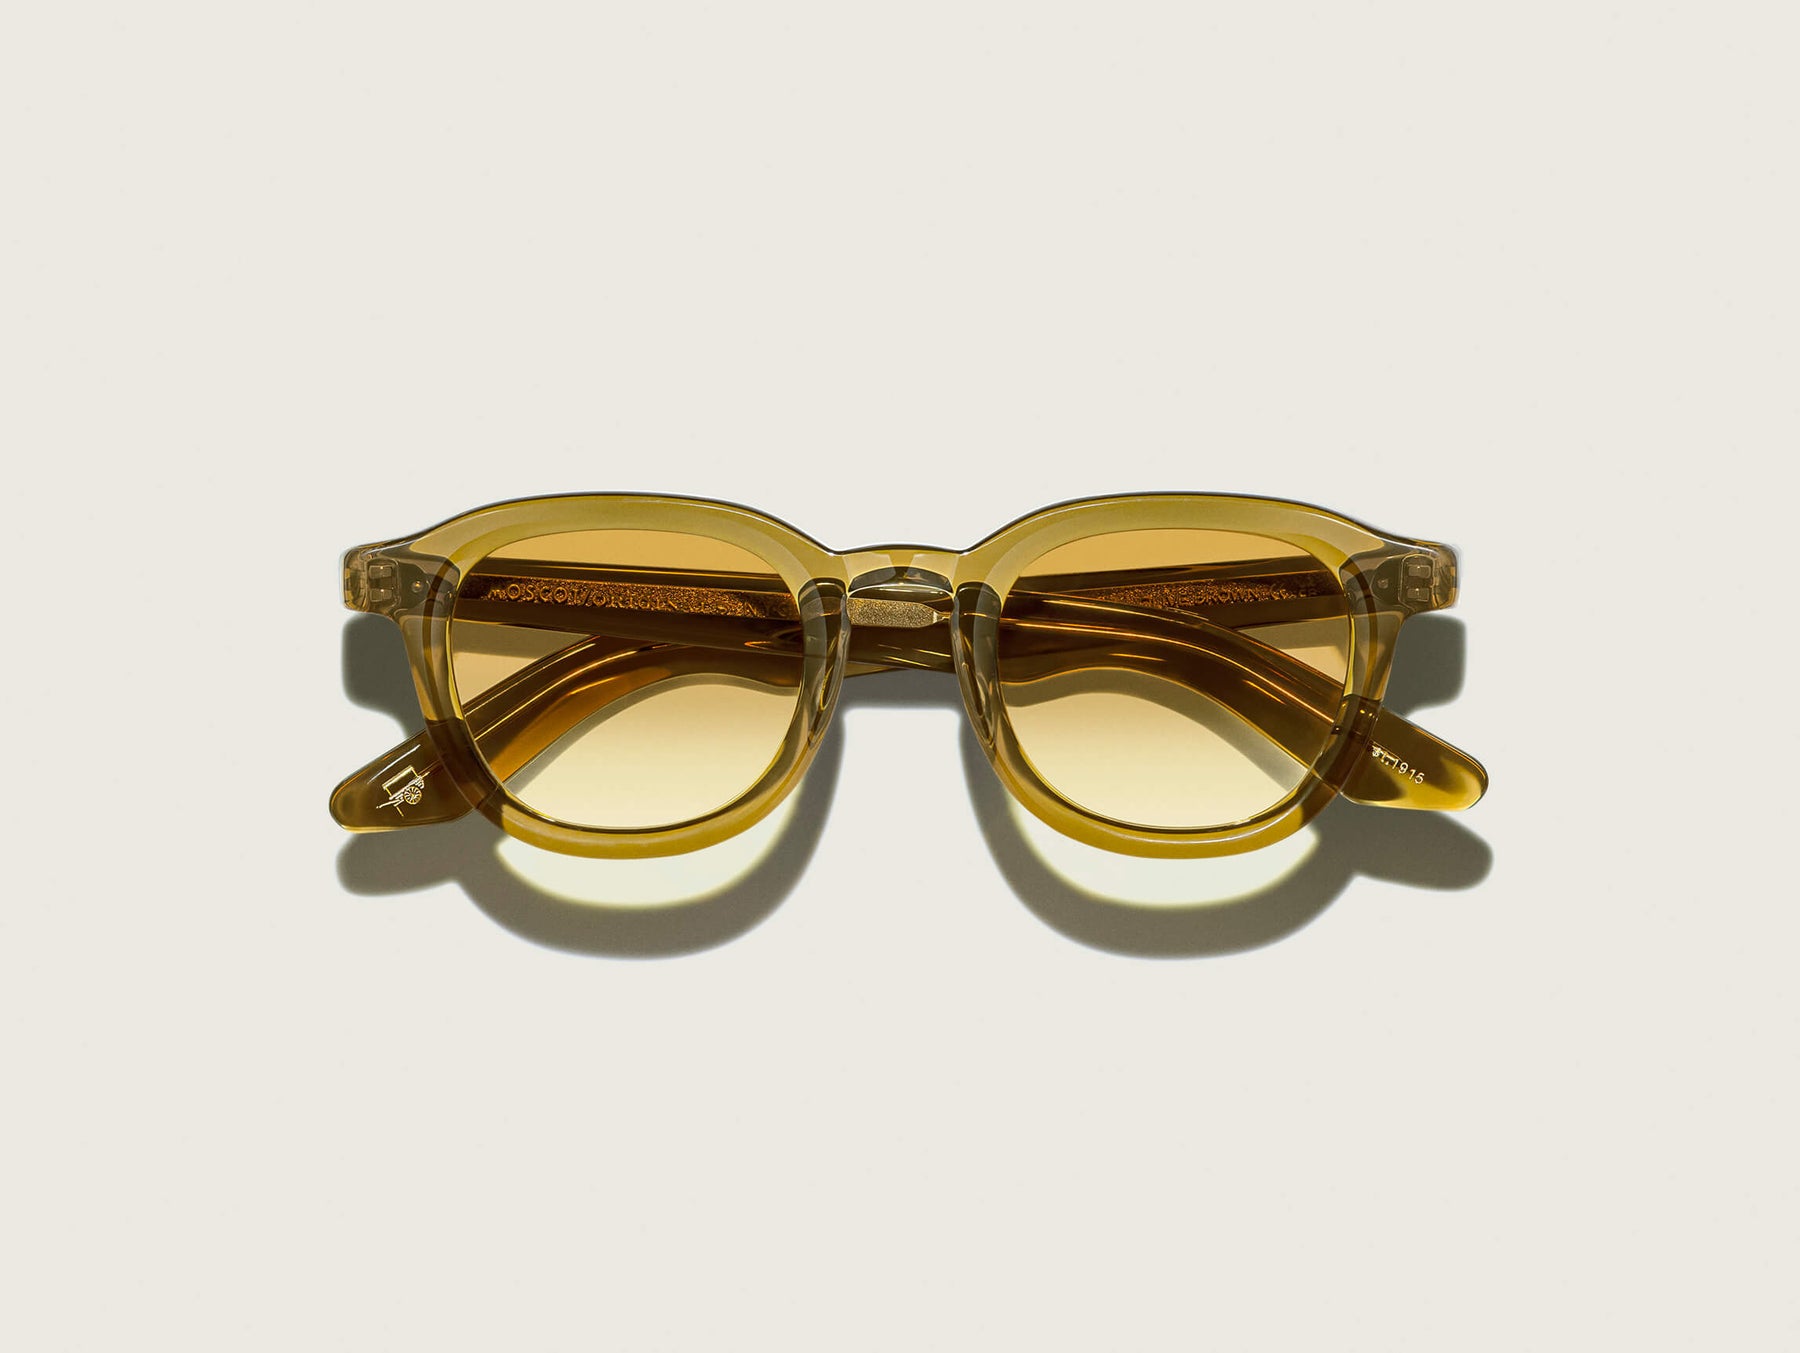 The DAHVEN SUN in Olive Brown with Chestnut Fade Tinted Lenses